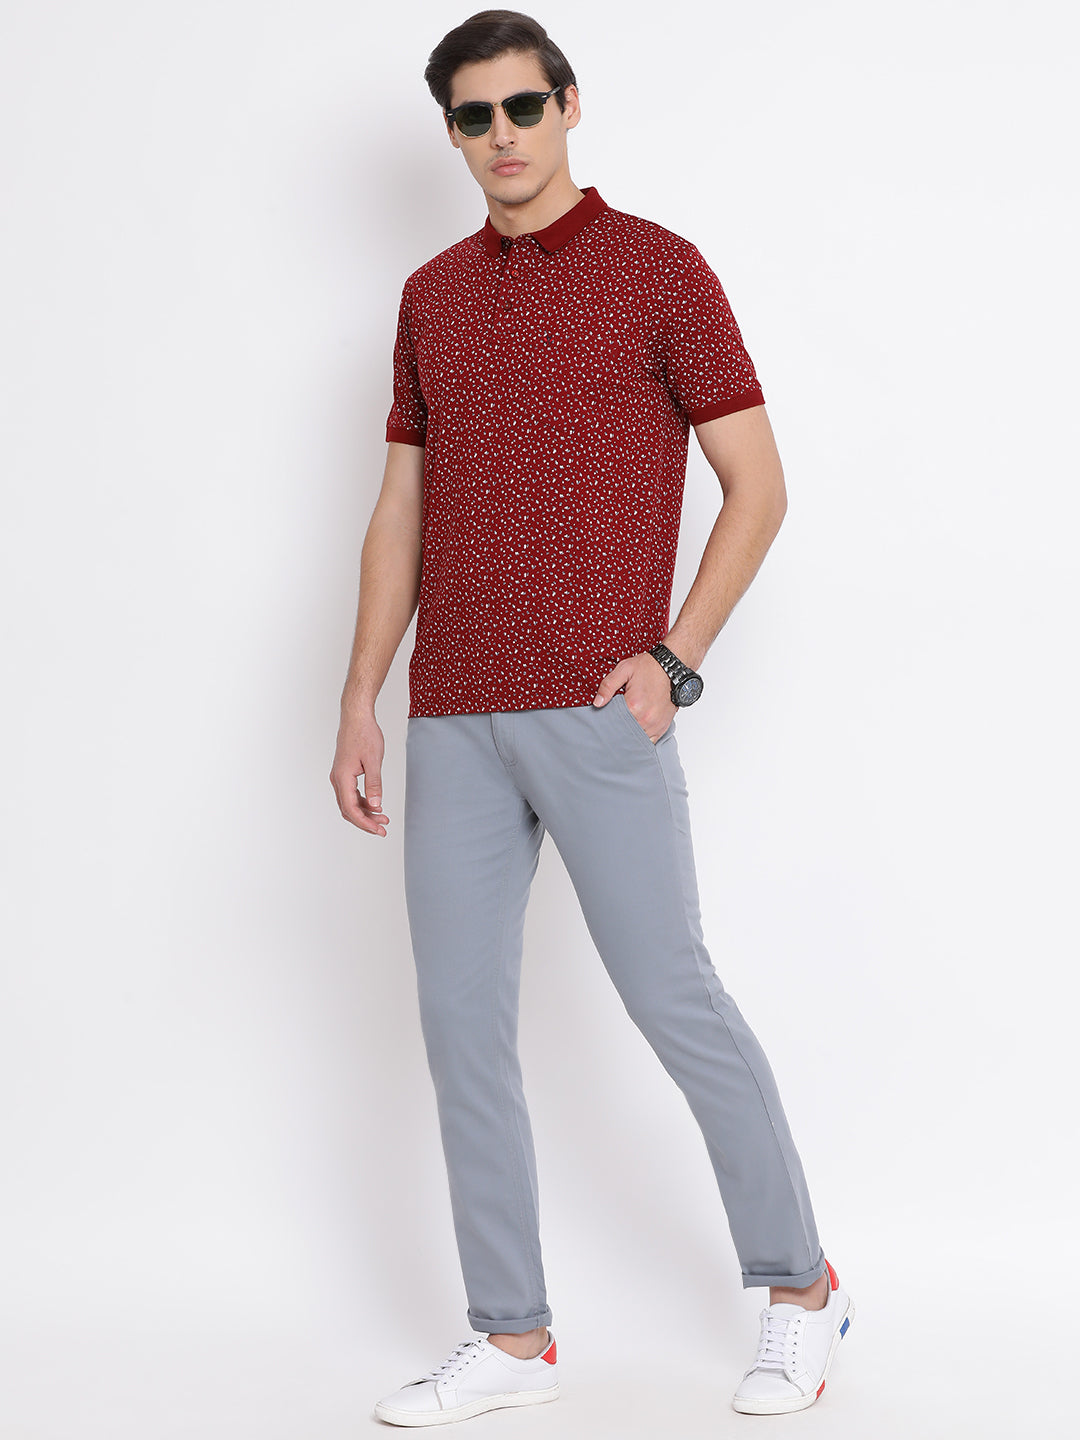 Red Printed Polo Neck T-Shirt - Men T-Shirts